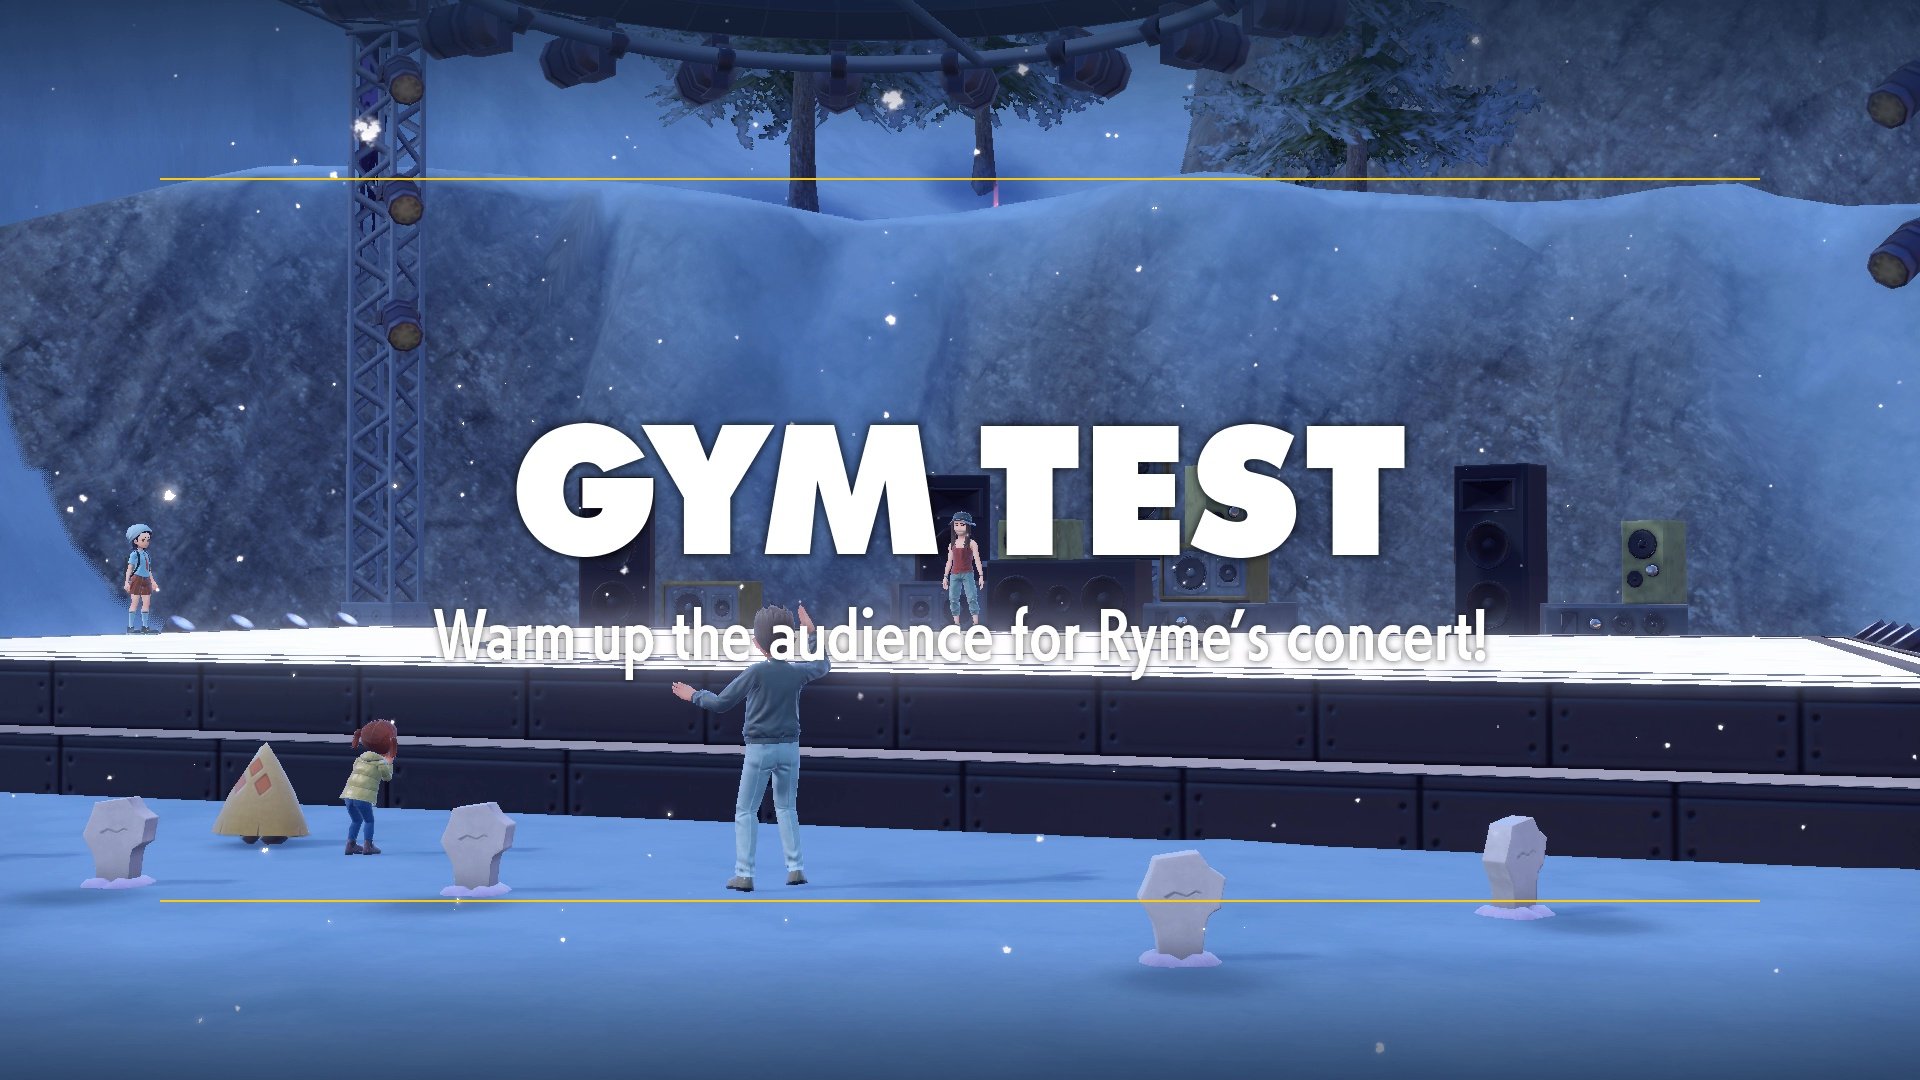 Gym Test: Warm Up The Audience For Rhymes Concert.